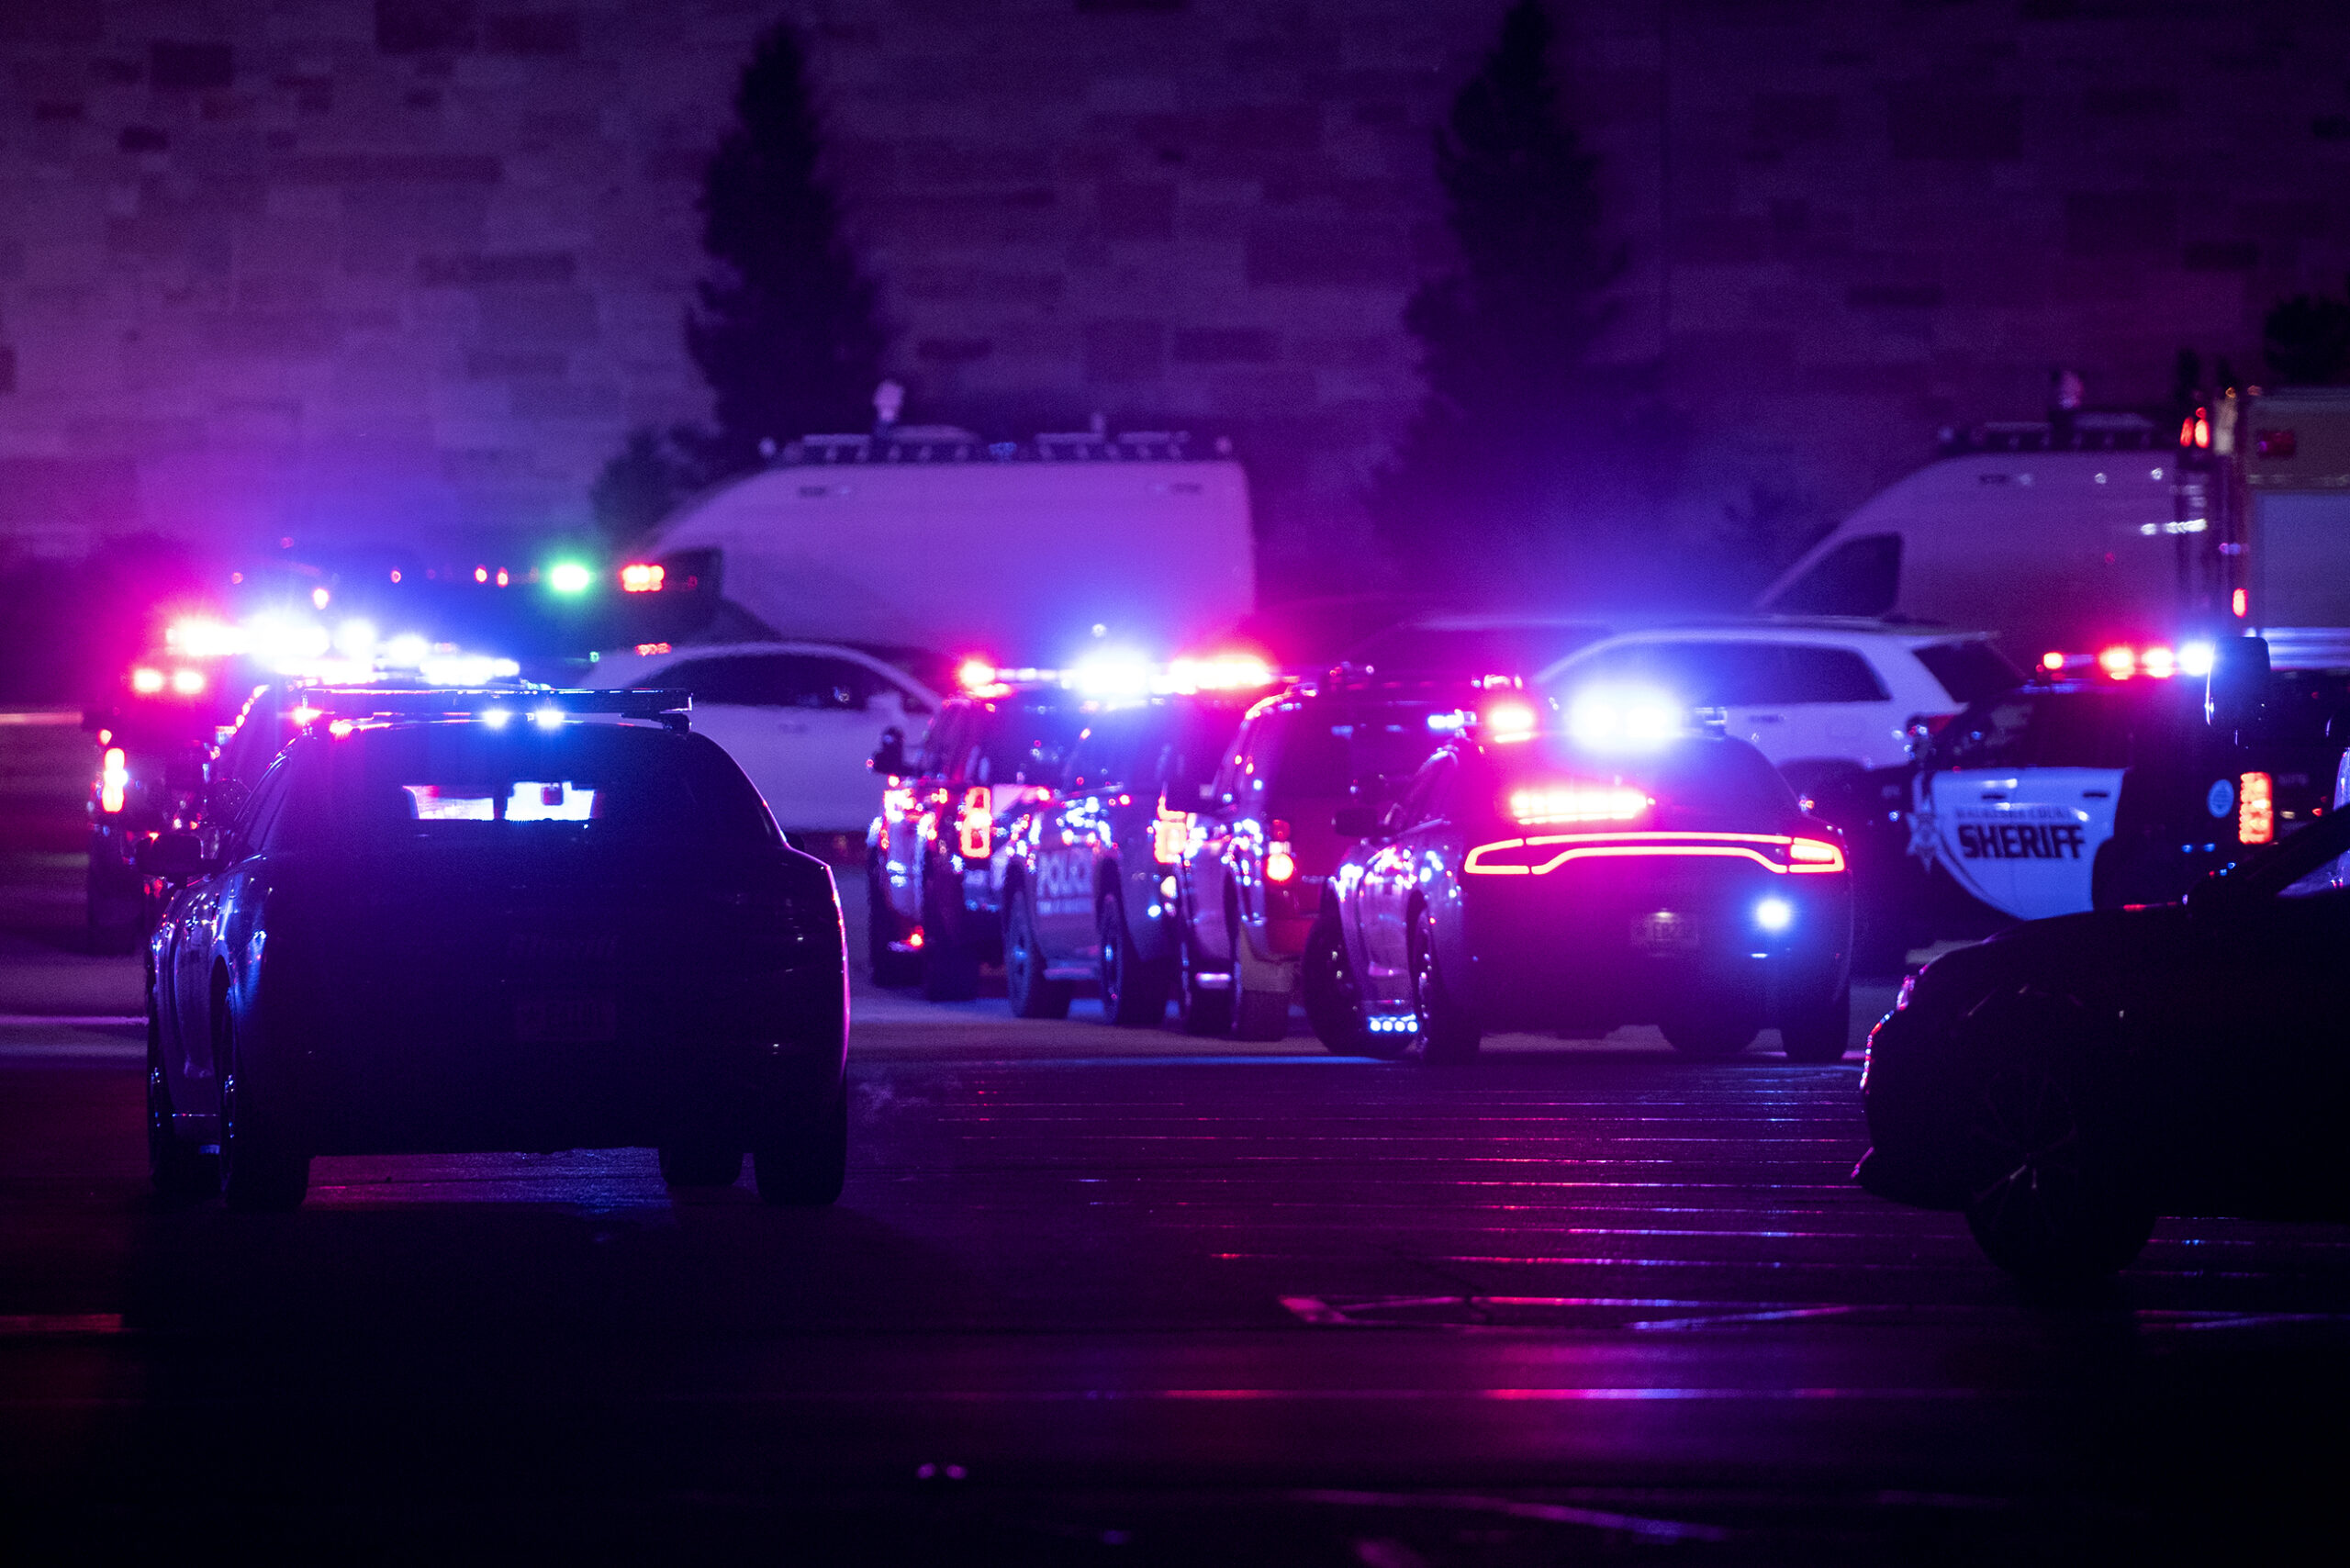 Red and blue lights from police cars illuminate a dark parking lot